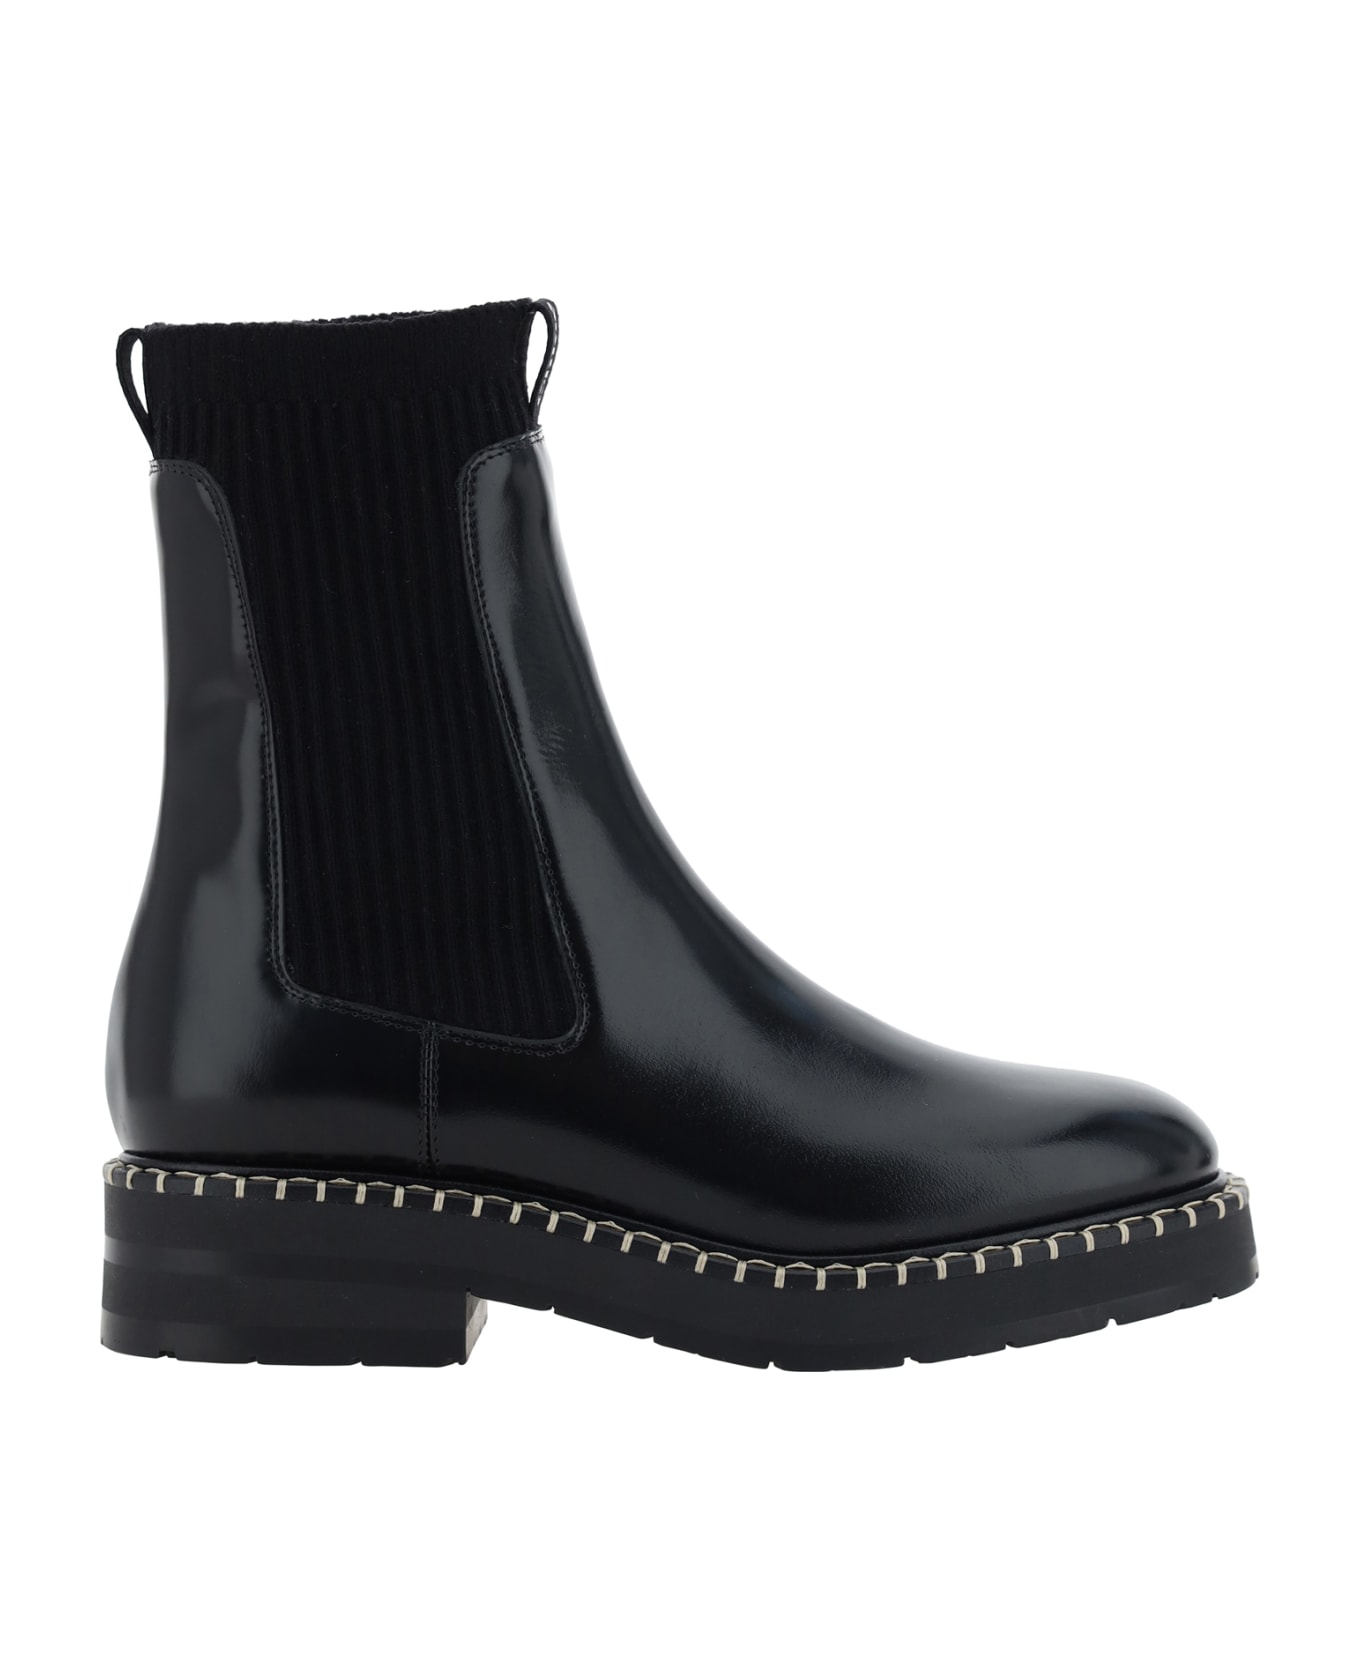 Chloé Glossy Ankle Boots - Black